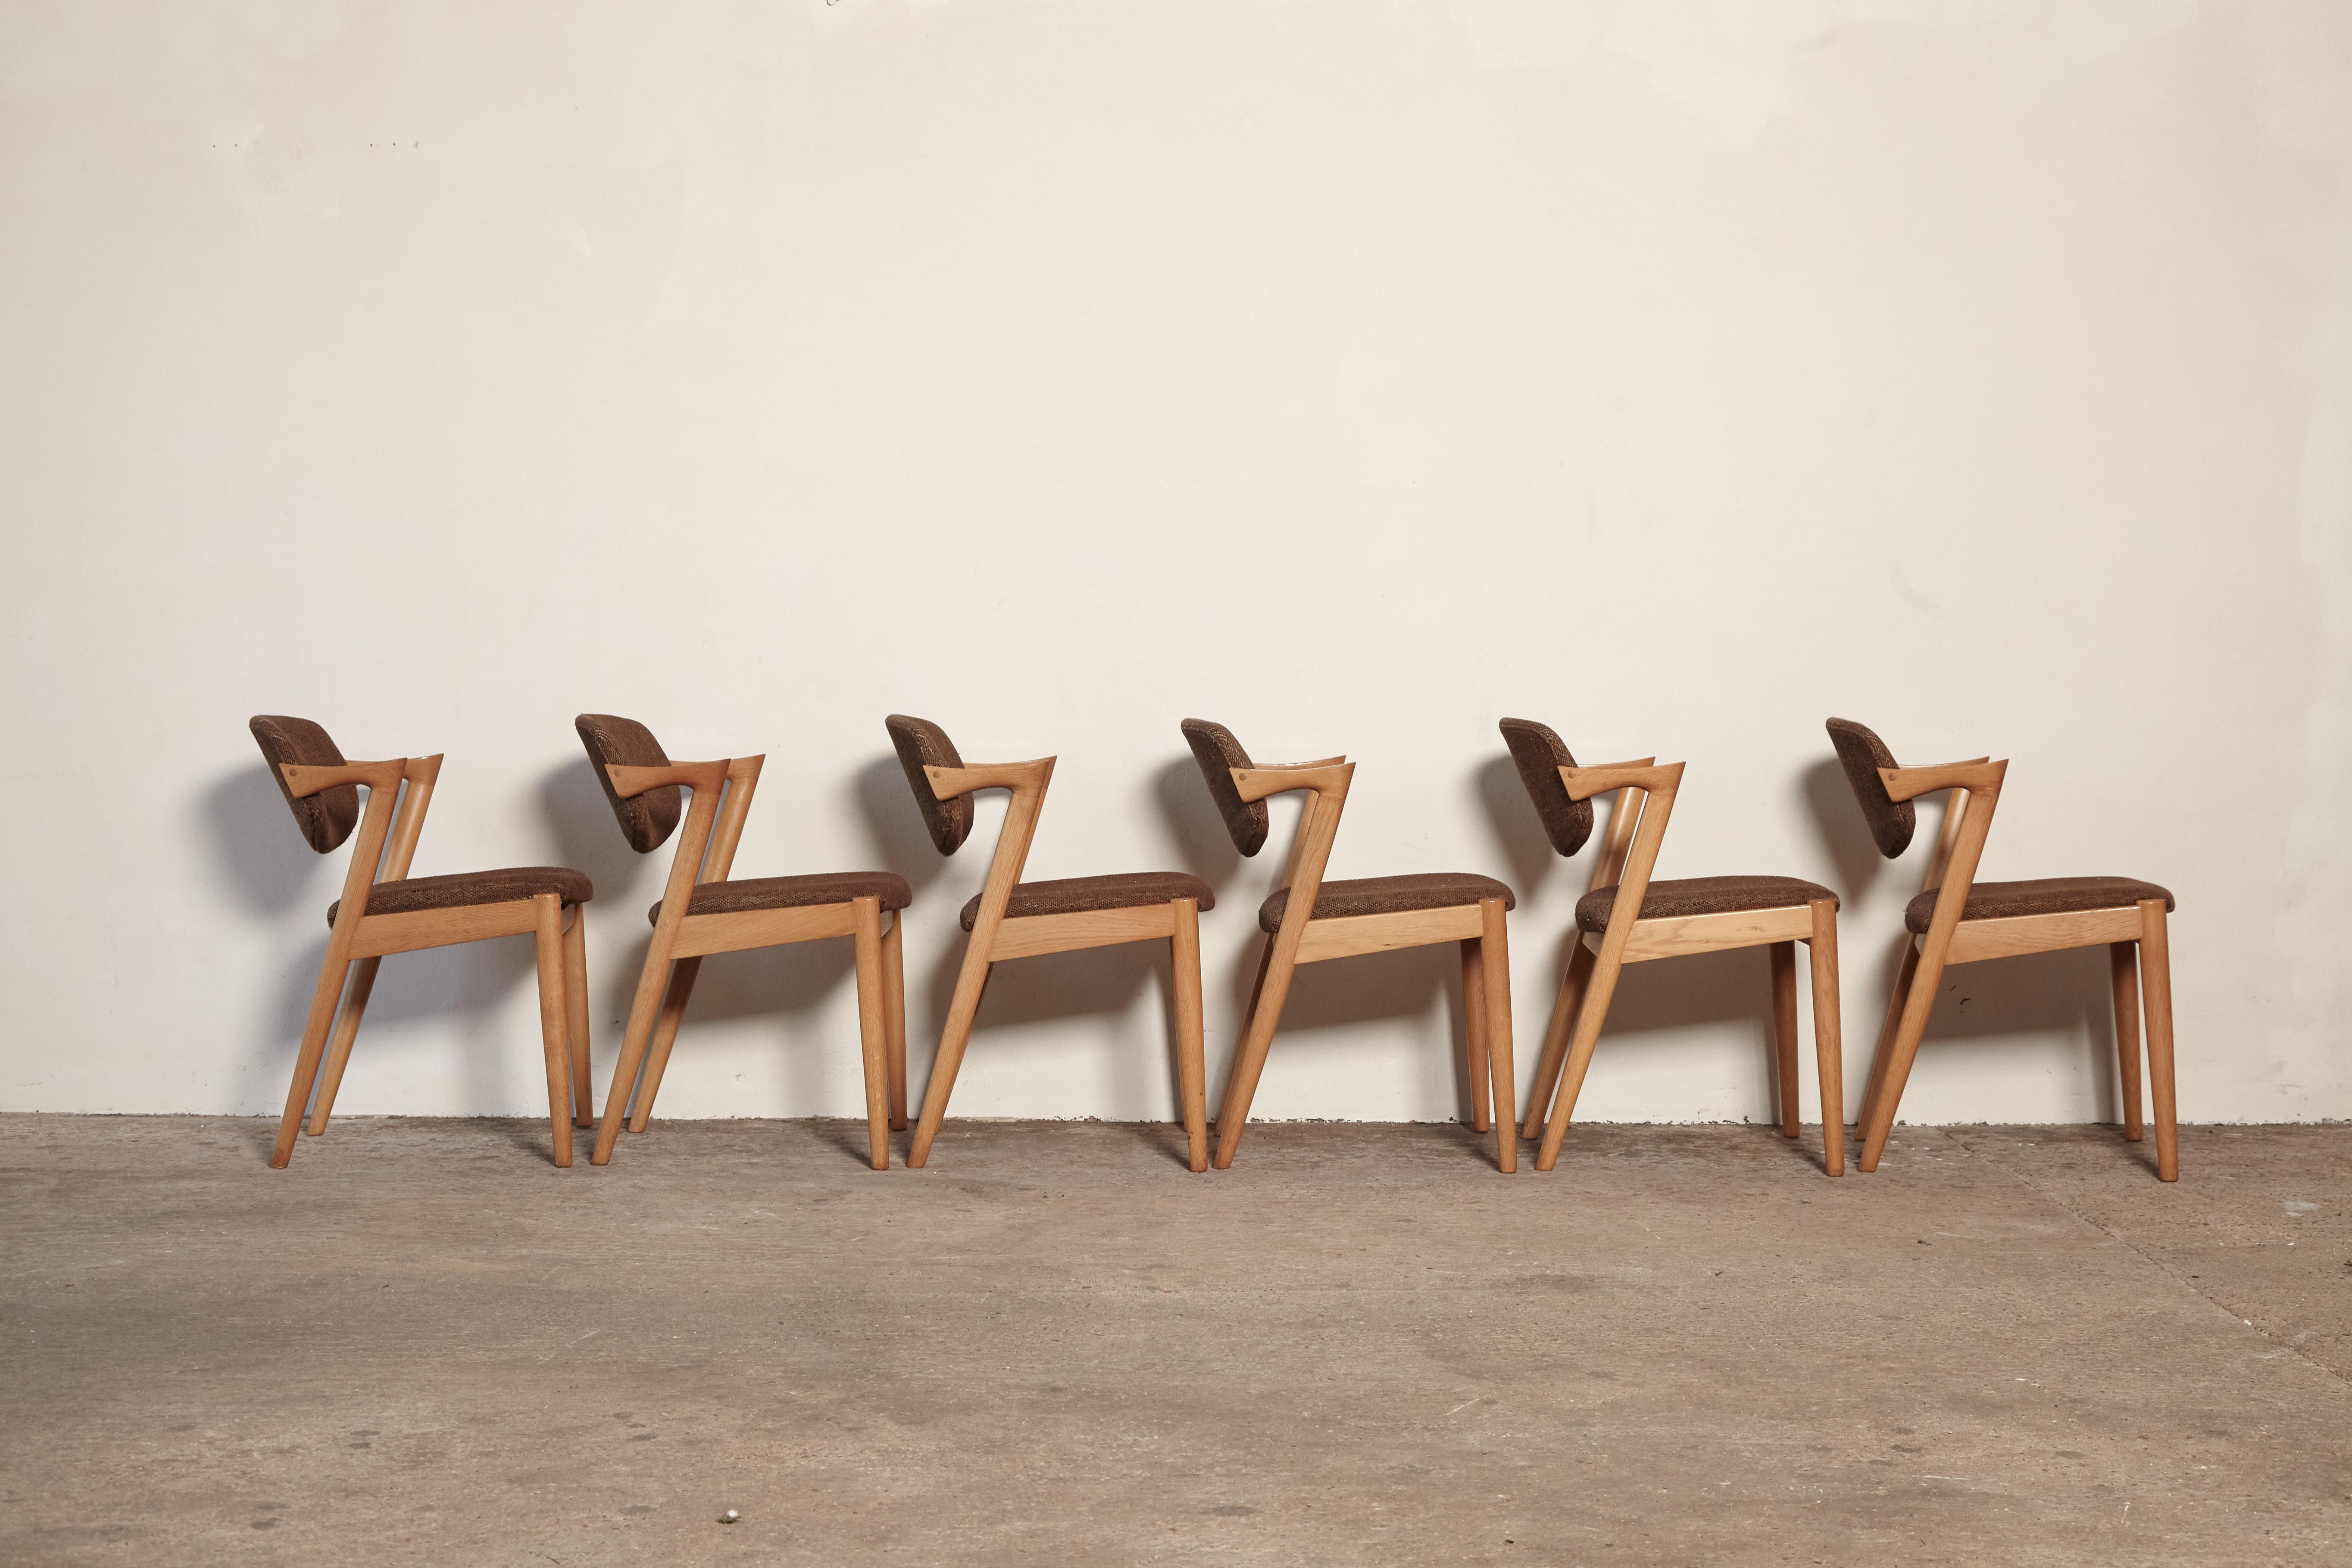 A set of six Model 42 oak dining chairs by Kai Kristiansen for Schou Andersen, Denmark. Tilting backrest. Original fabric seat covers - we offer a recovering service if you would like to replace the fabric.  Very good original condition.  Ships